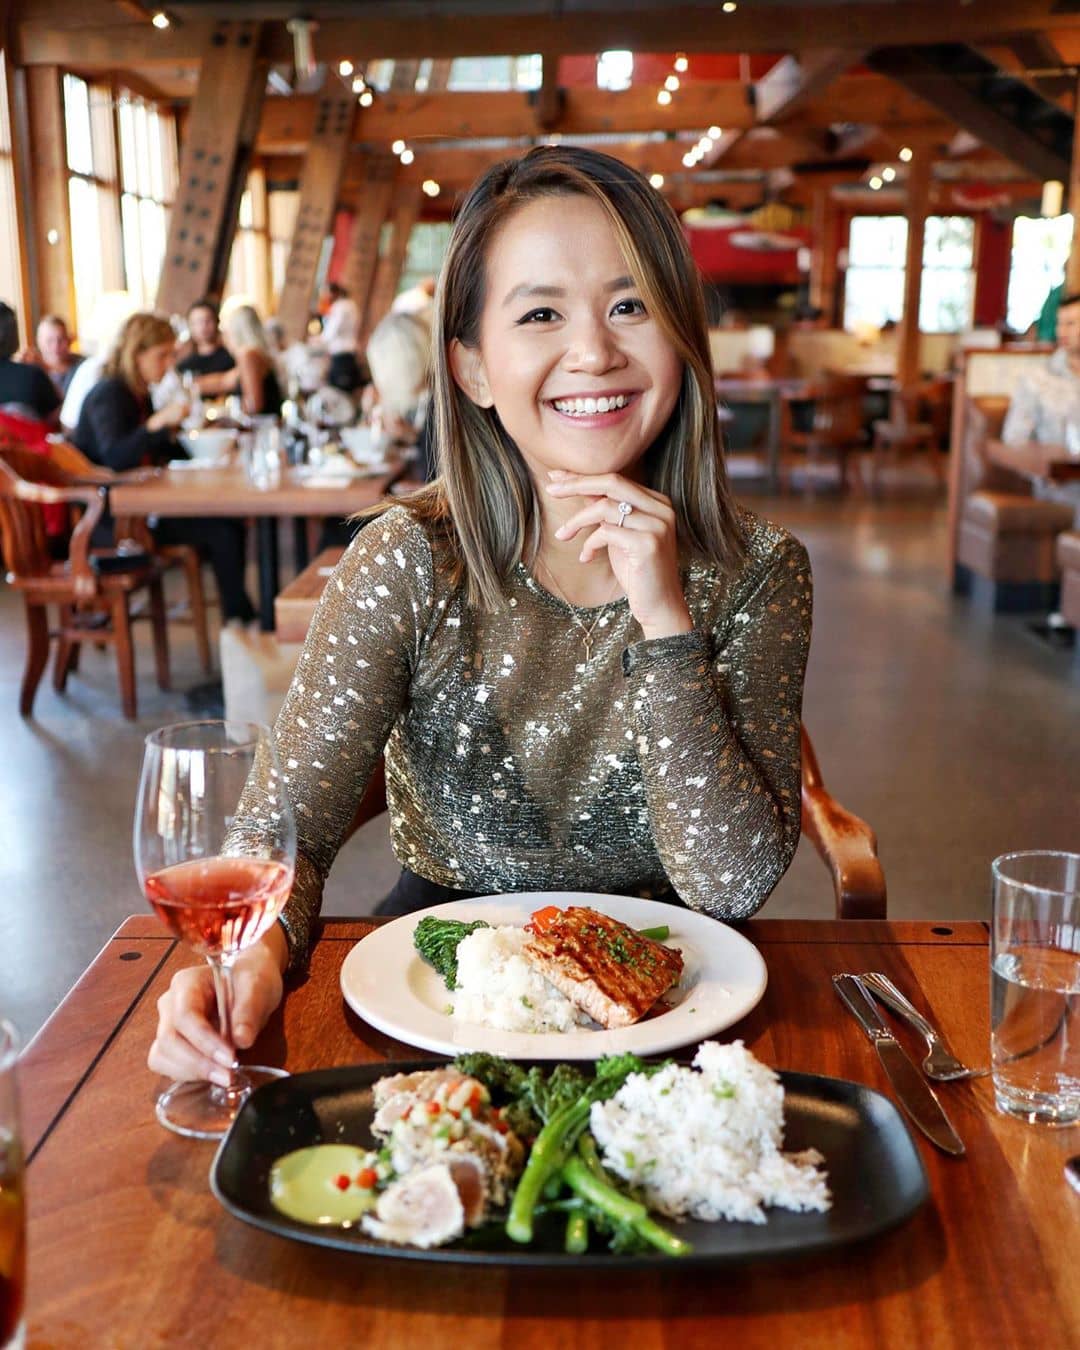 granville island neighbourhood guidebook - sandbar of girl smiling with food infront of her on the table